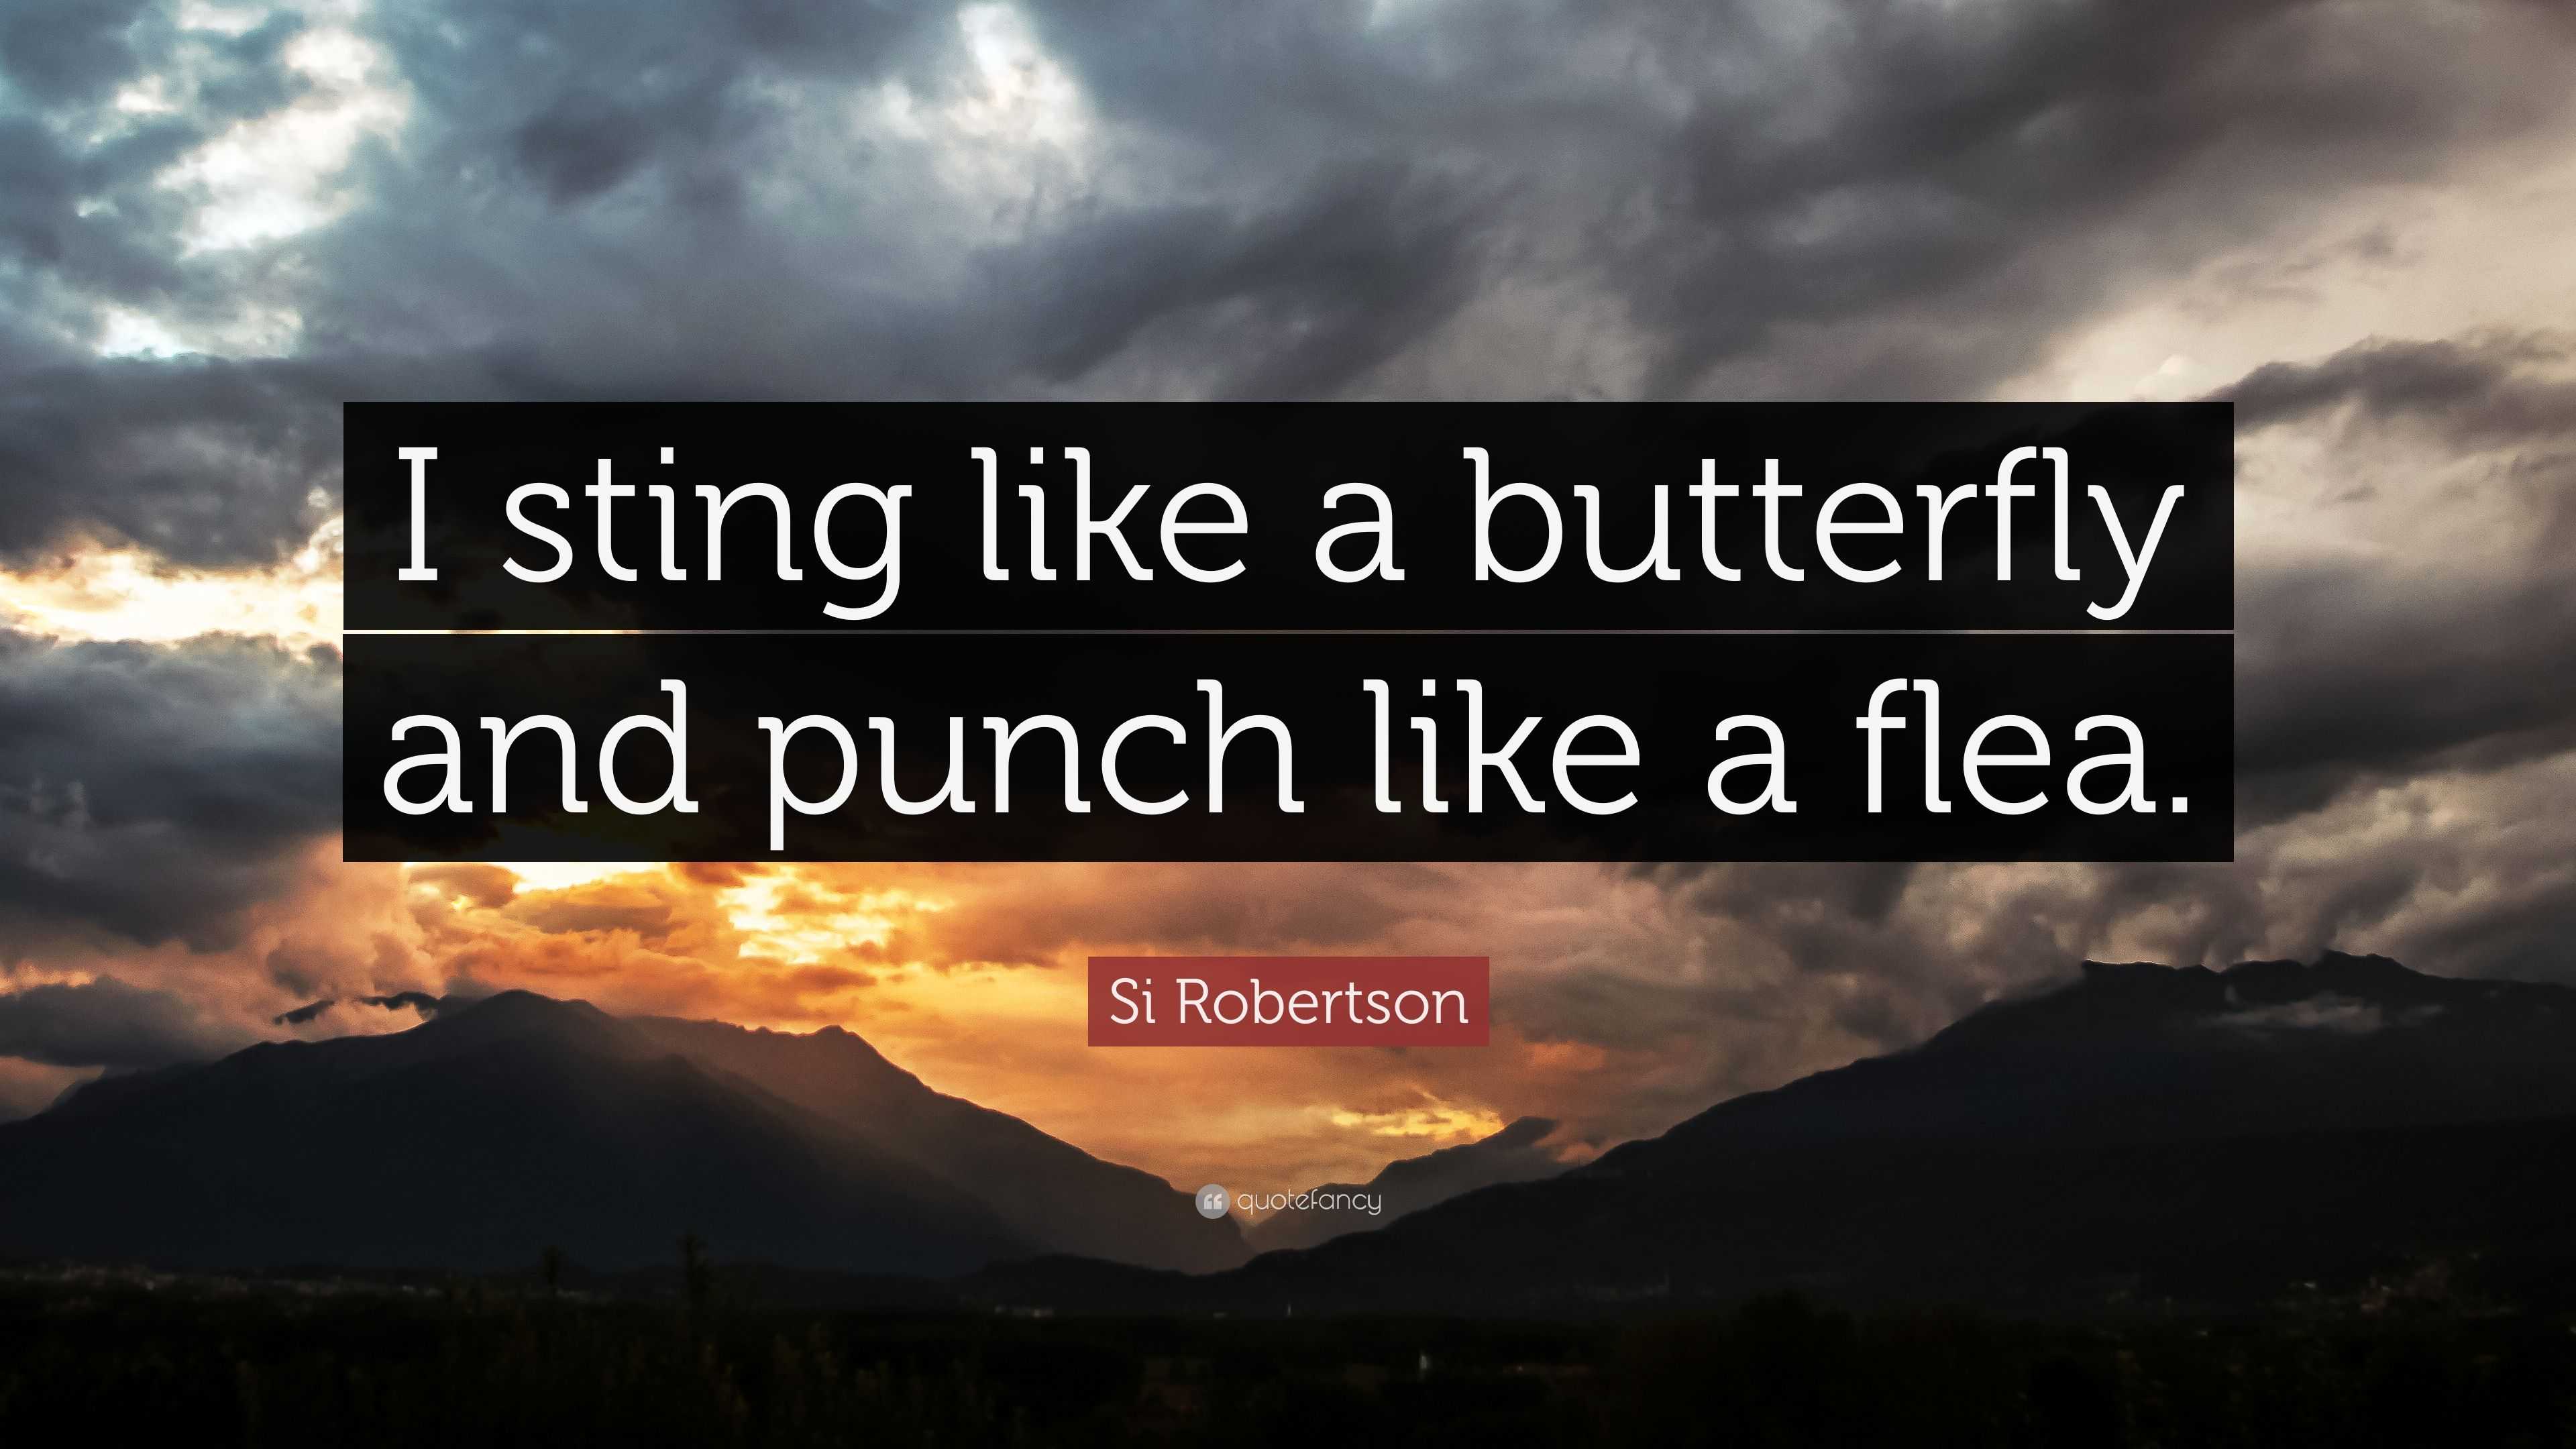 Si Robertson Quote: “I sting like a butterfly and punch like a flea.”